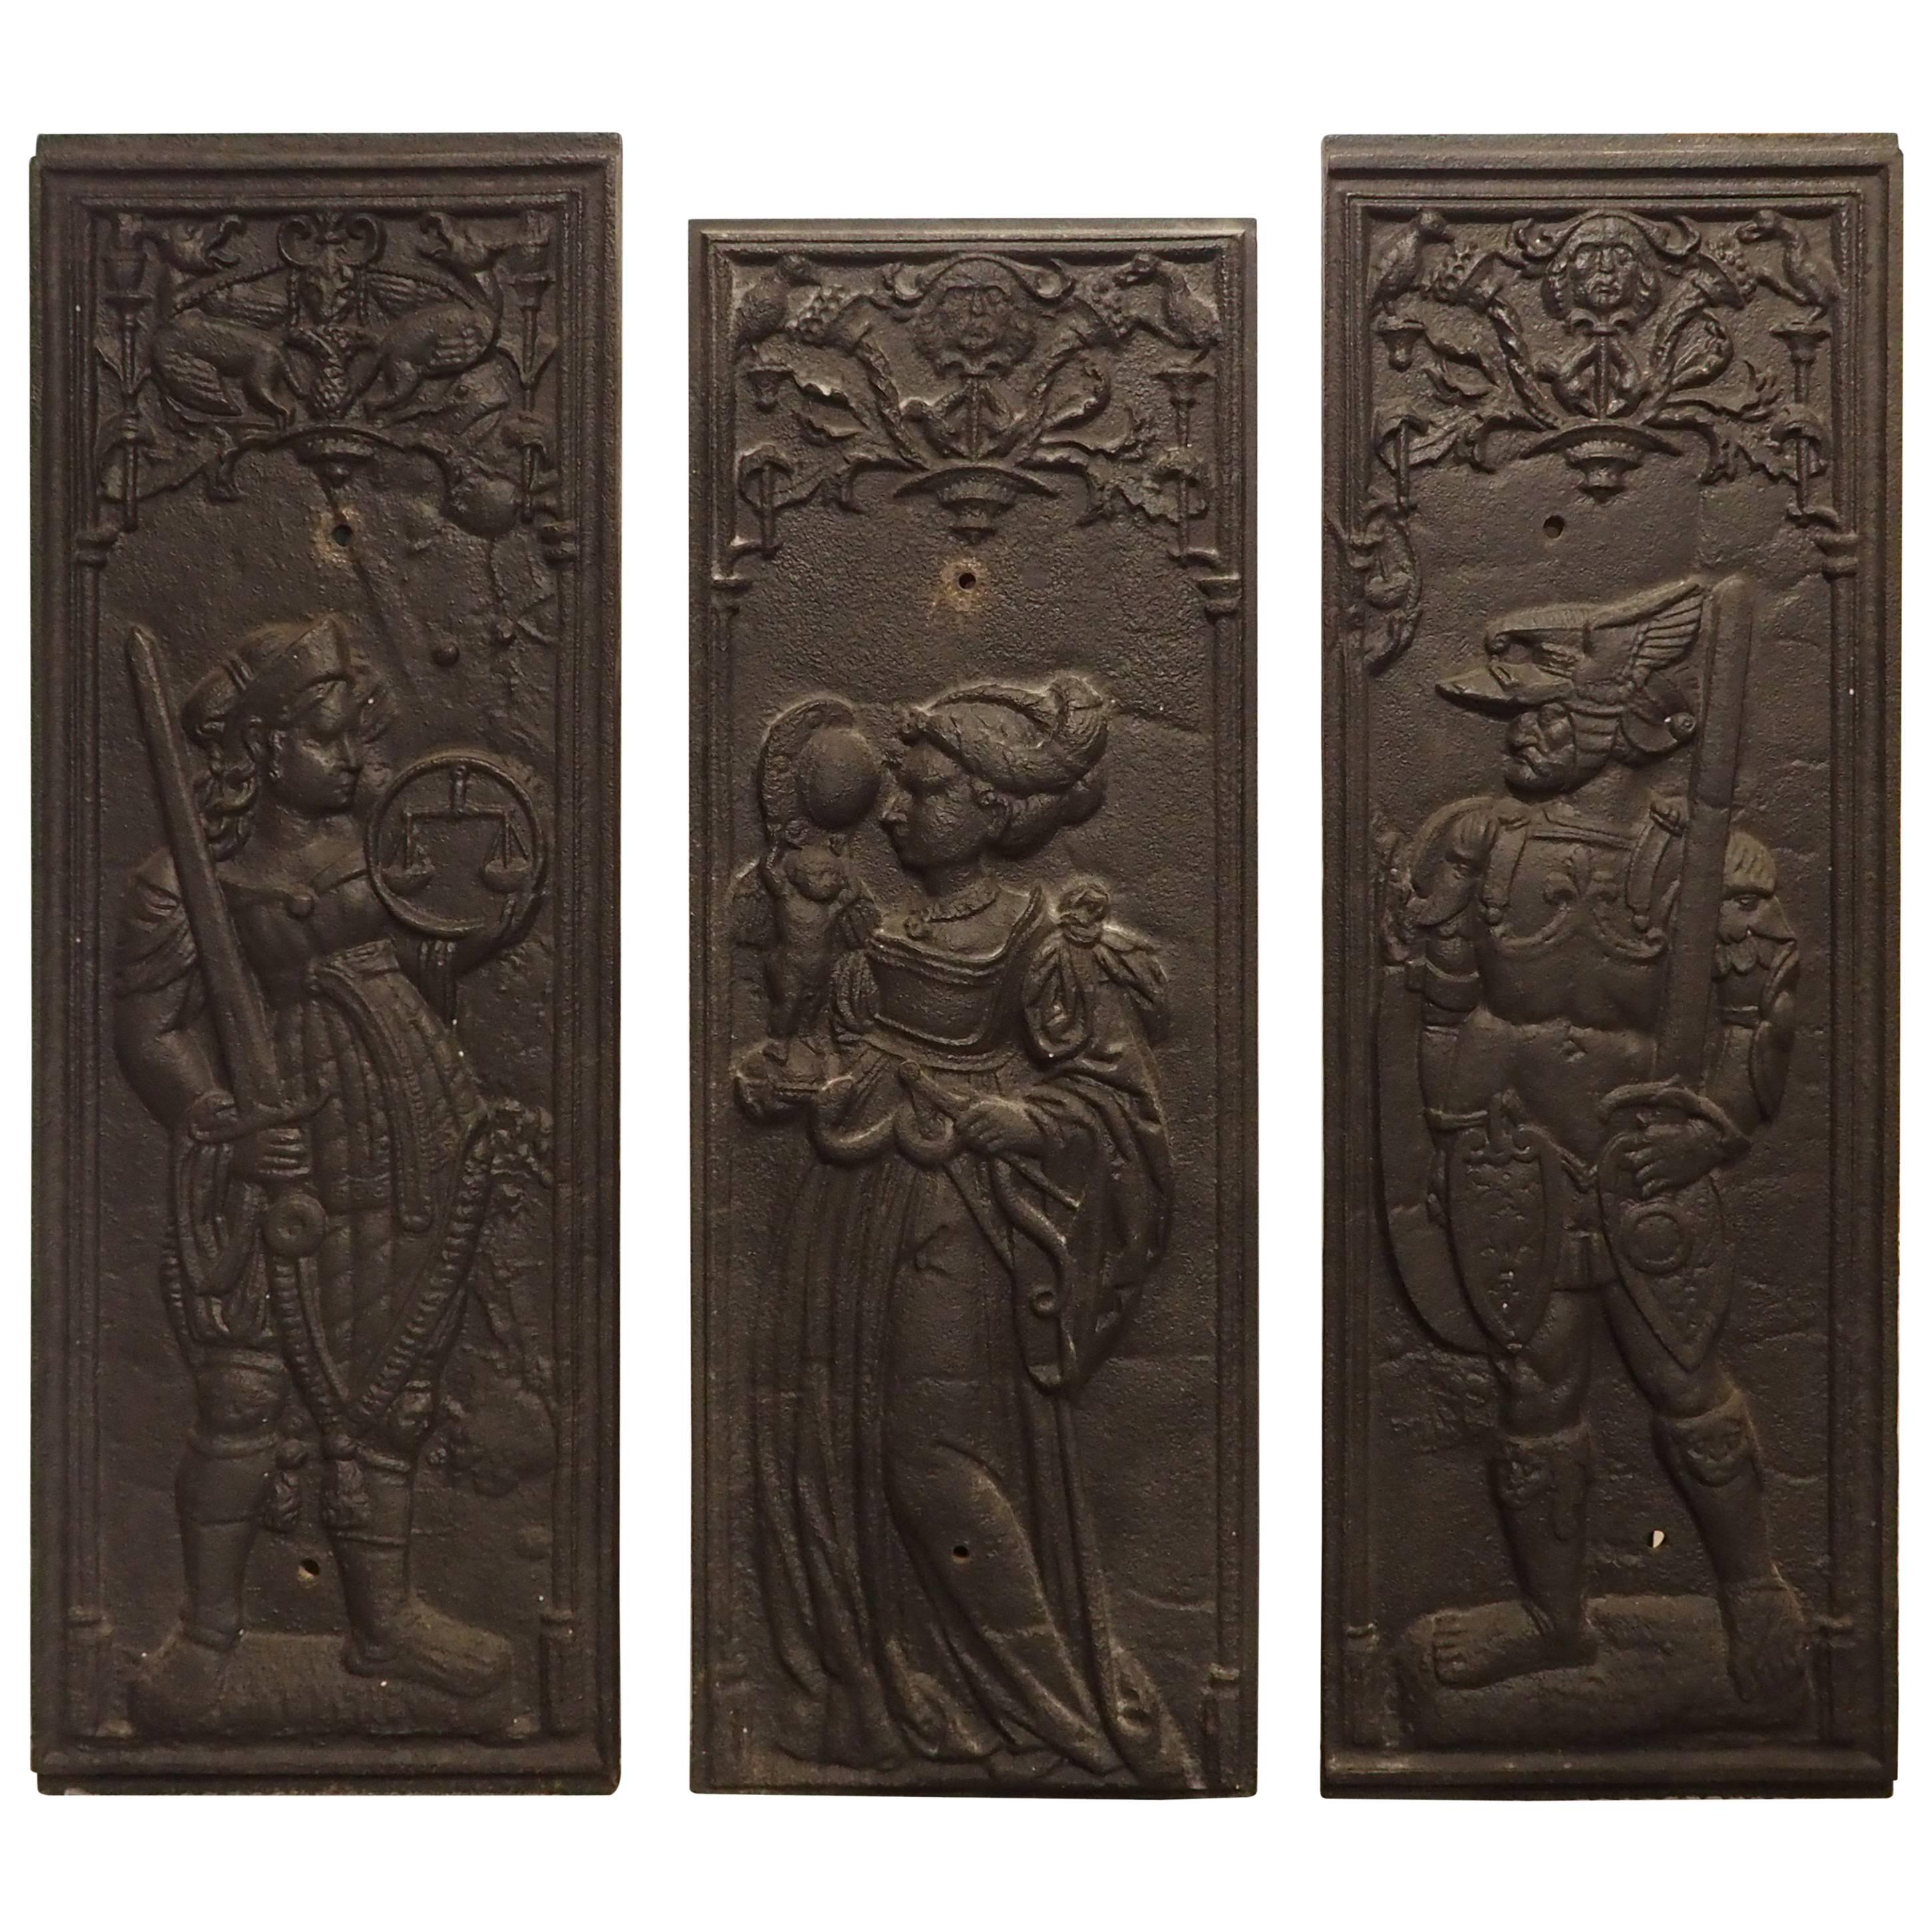 Rare Antique Cast Iron French Fireplace Plaques, Justice, Prudence and Courage